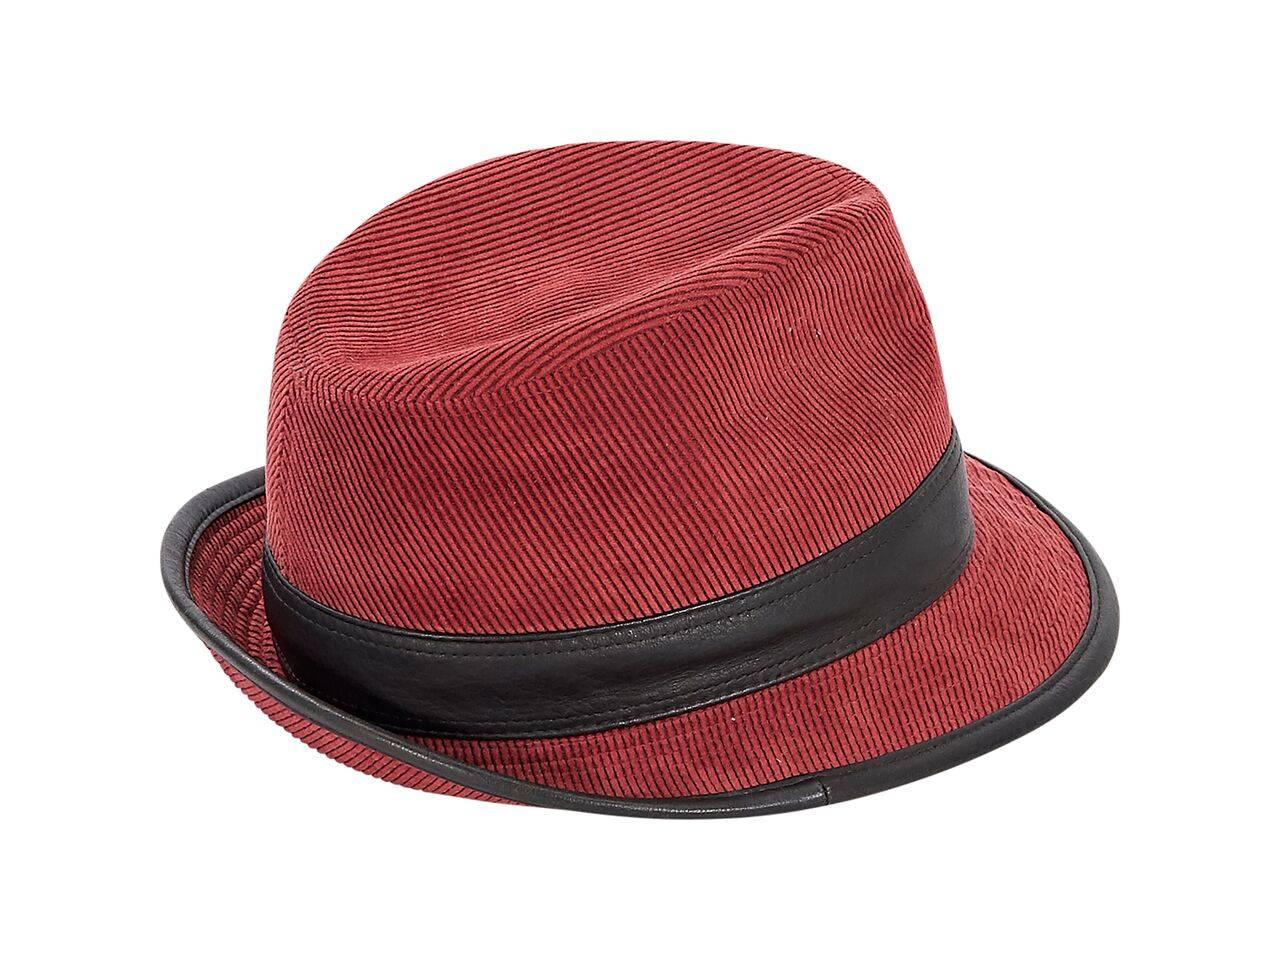 Product details:  Red corduroy trilby hat by Hermes.  Trimmed with black leather.  Inner sweatband.  Size 55. 
Condition: Pre-owned. Very good.
Est. Retail $ 978.00